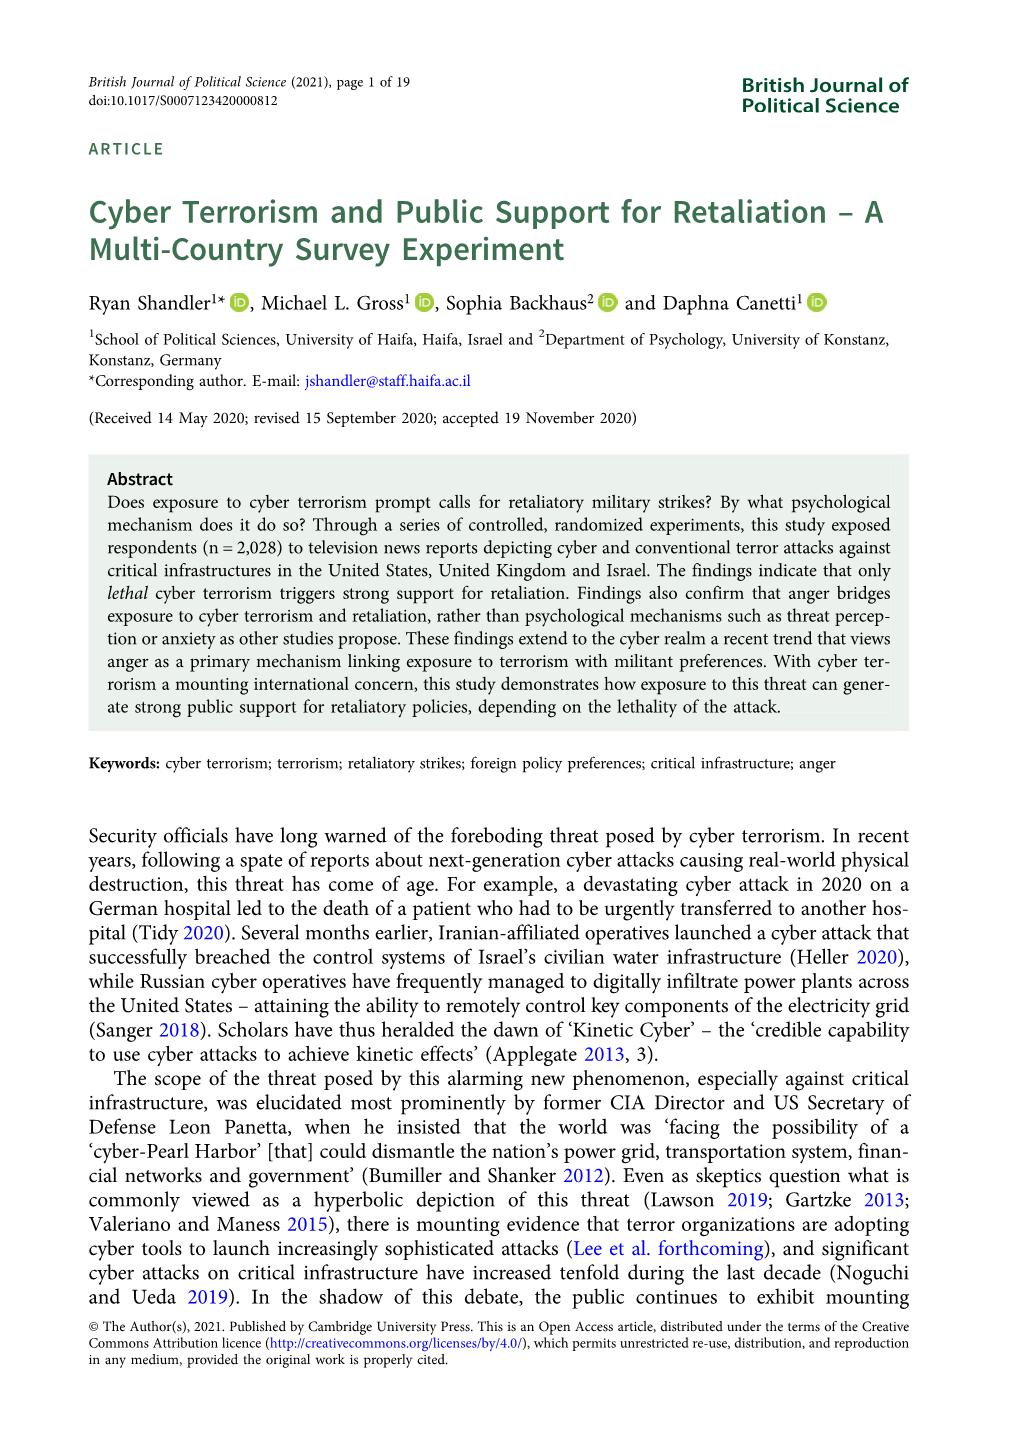 Cyber Terrorism and Public Support for Retaliation – a Multi-Country Survey Experiment